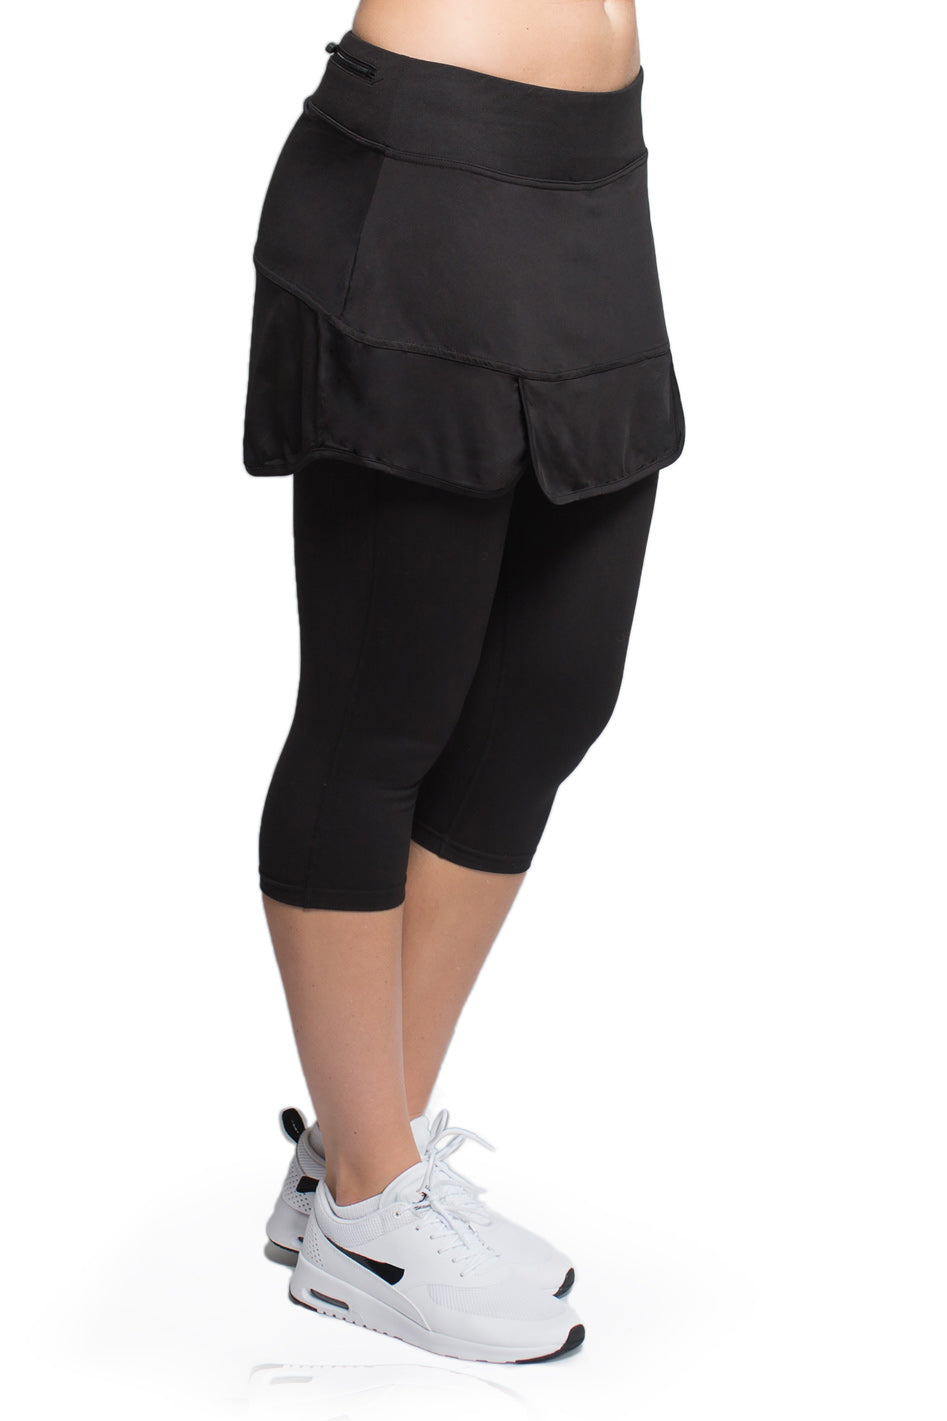 Side view of woman posing in the black version of the Endurance Skirted Capri Legging